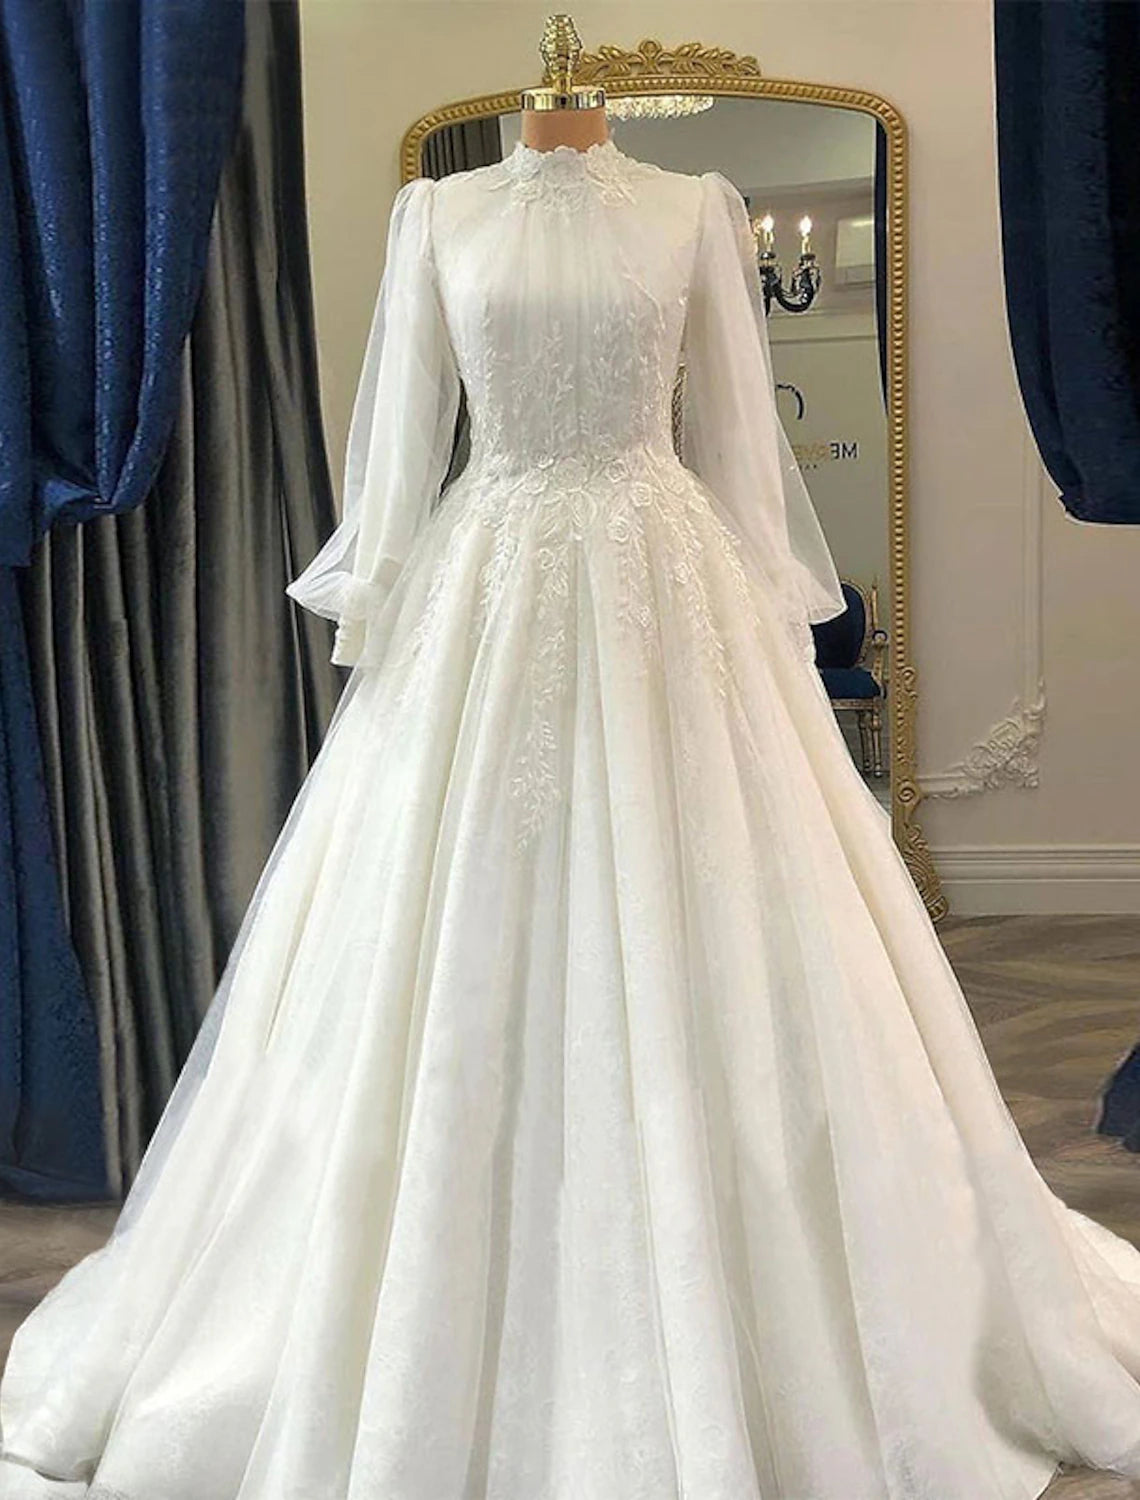 Engagement Vintage 1940s / 1950s Formal Fall Wedding Dresses Ball Gown High Neck Long Sleeve Court Train Lace Bridal Gowns With Pleats Appliques Summer Wedding Party